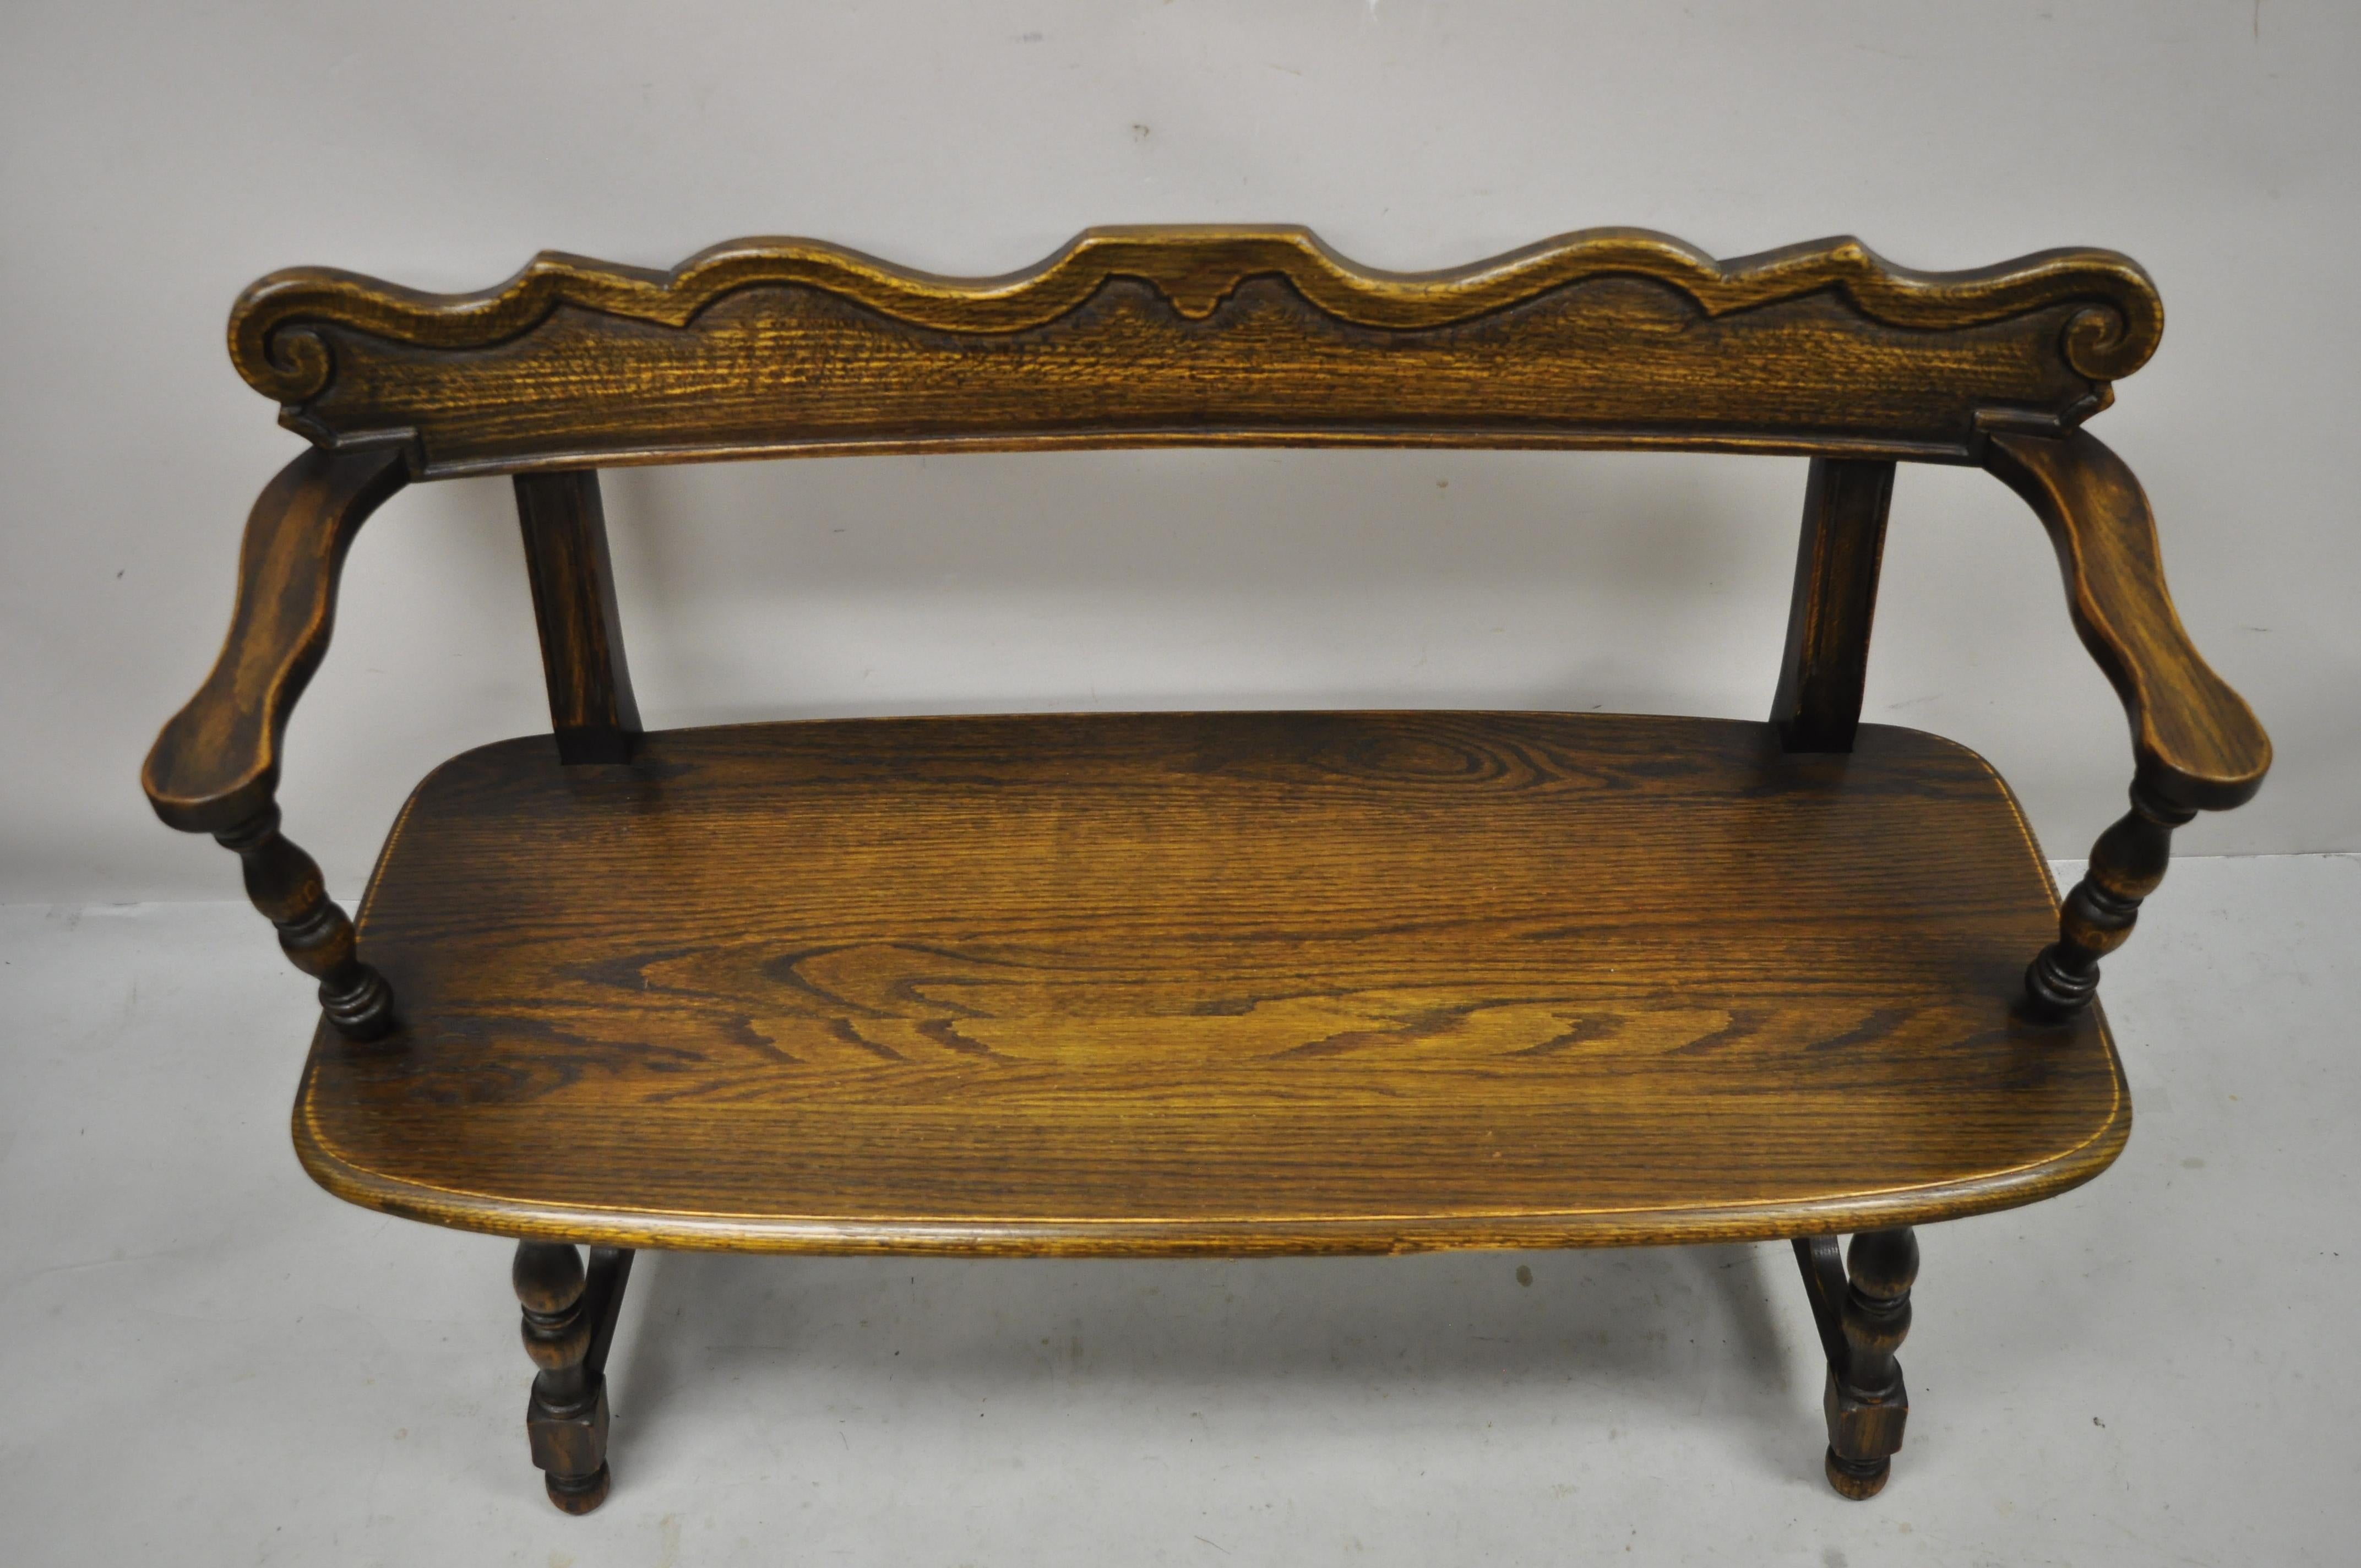 Arts & Crafts Jamestown lounge Feudal bench, Romweber Viking oak style. Item features believed to be Feudal Oak Collection by Jamestown, solid wood construction, beautiful wood grain, nicely carved details, very nice vintage item, quality American